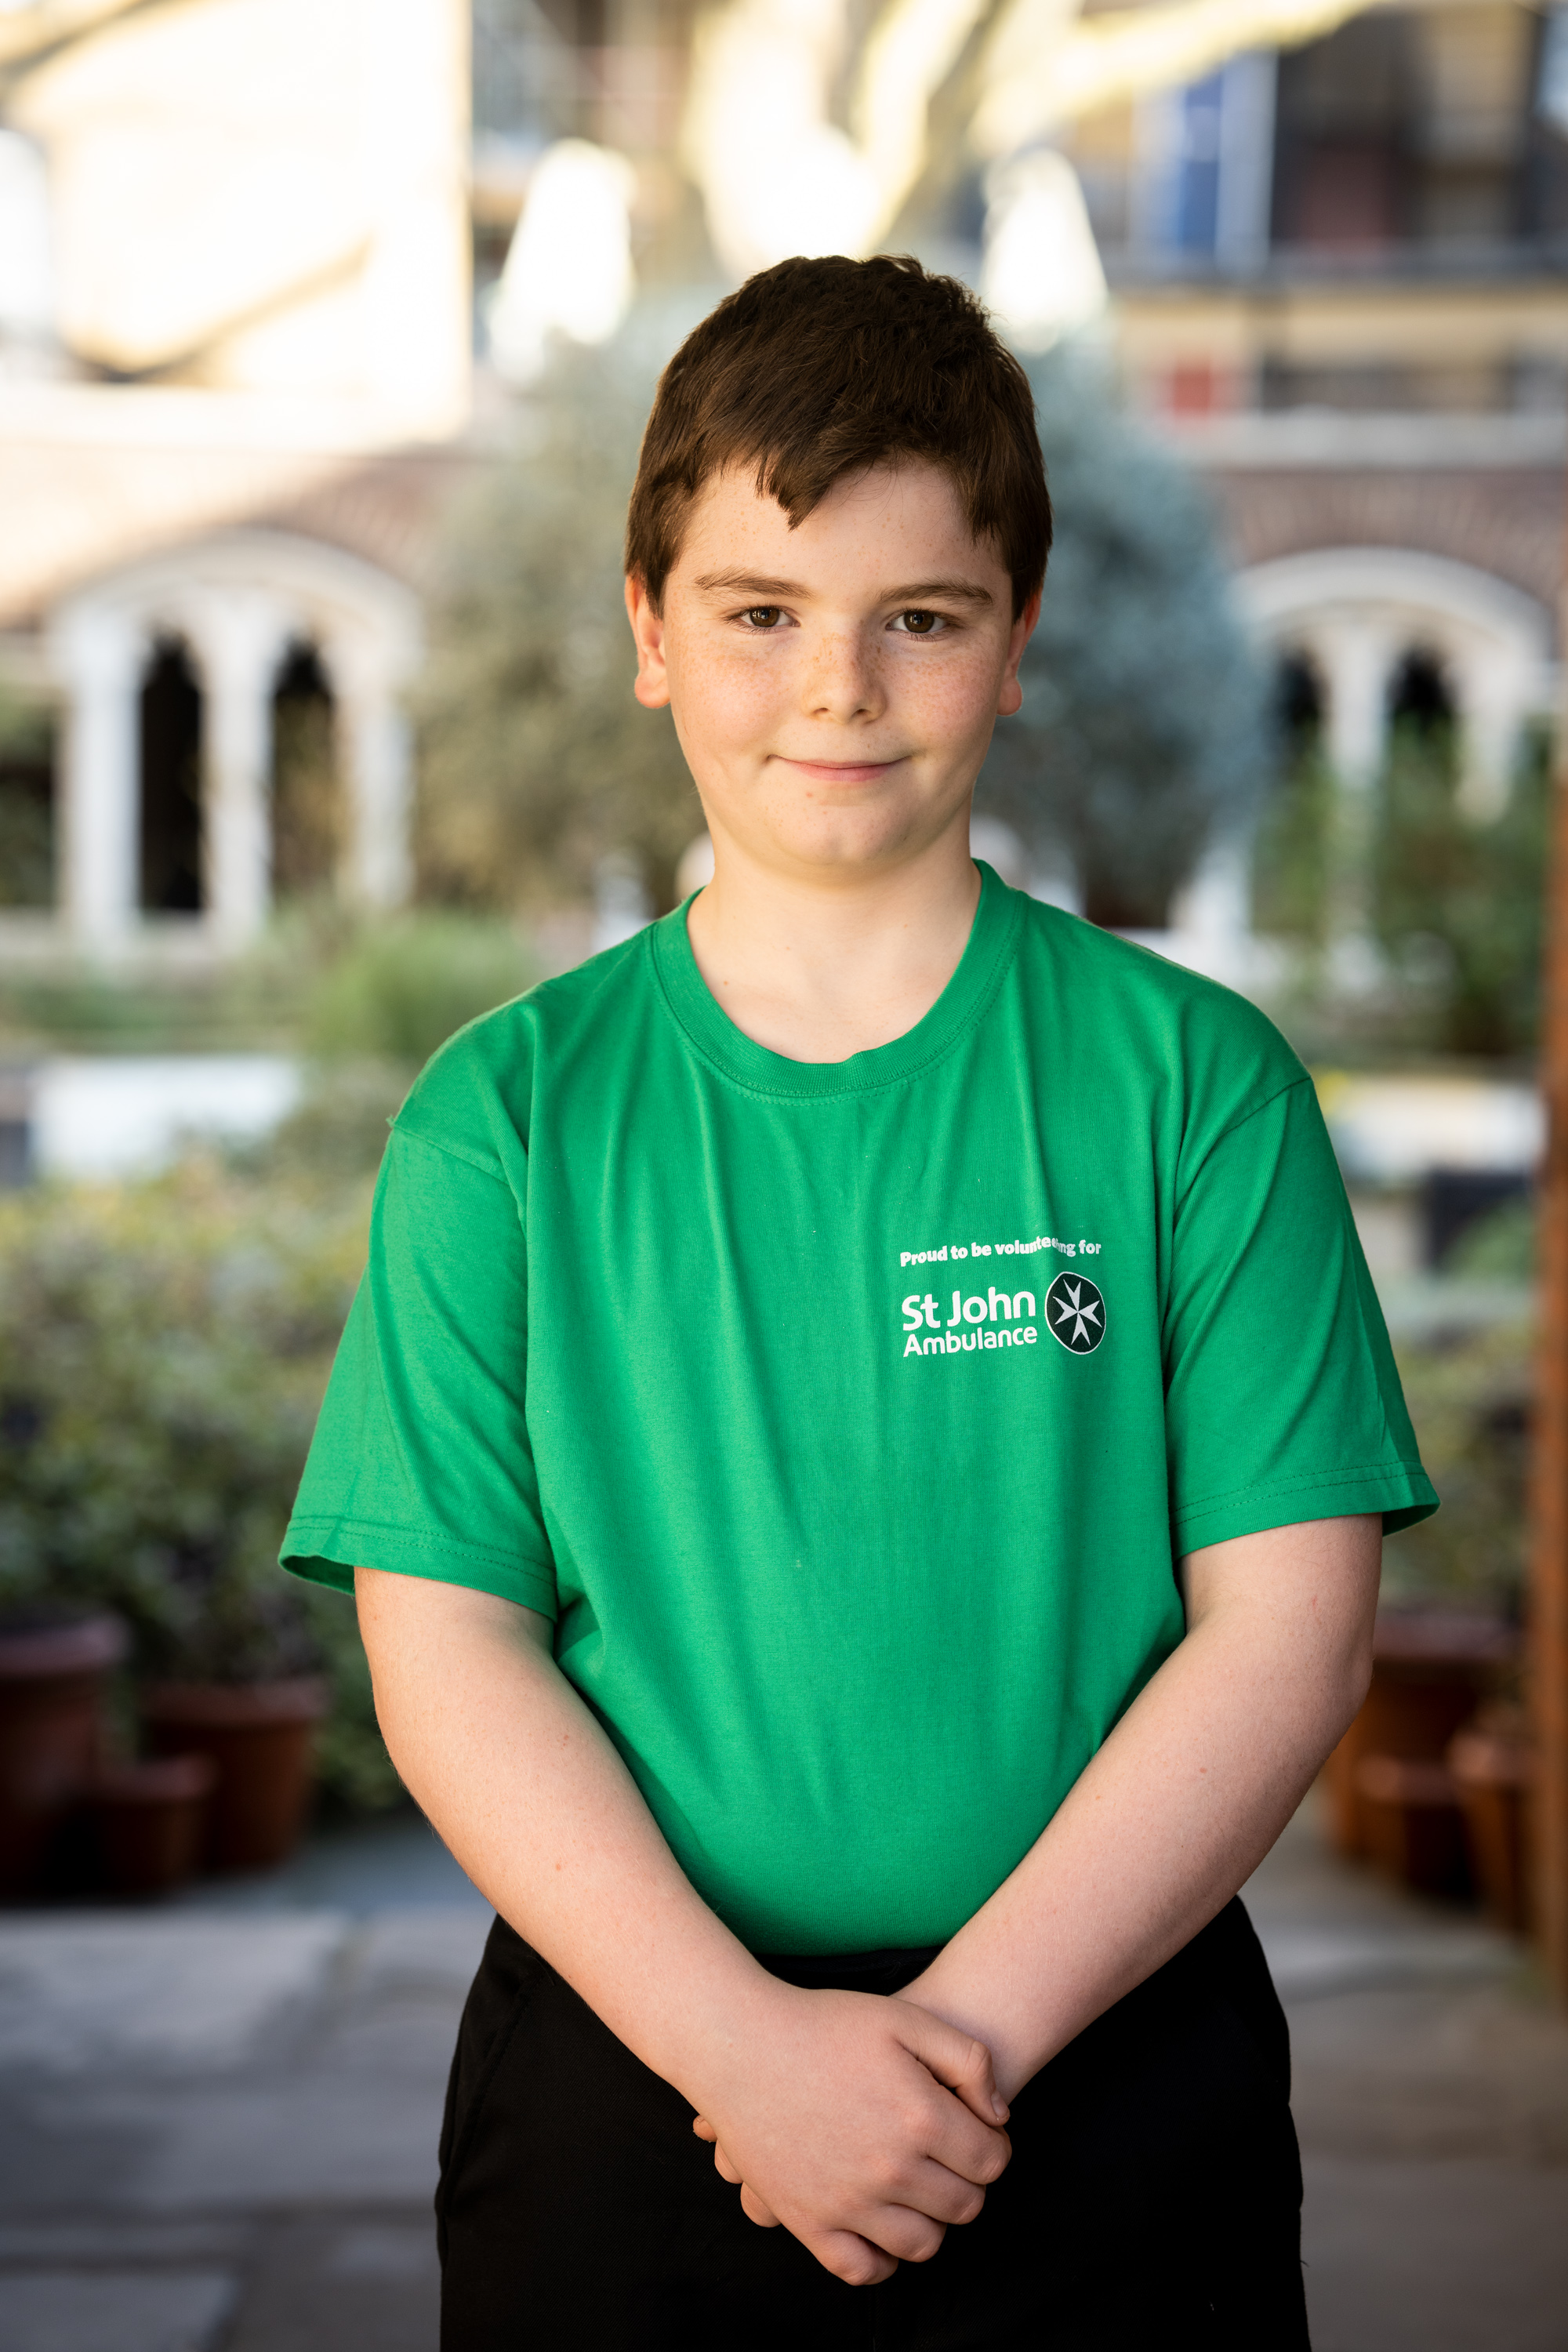 Boy wearing a green top and looking at the camera